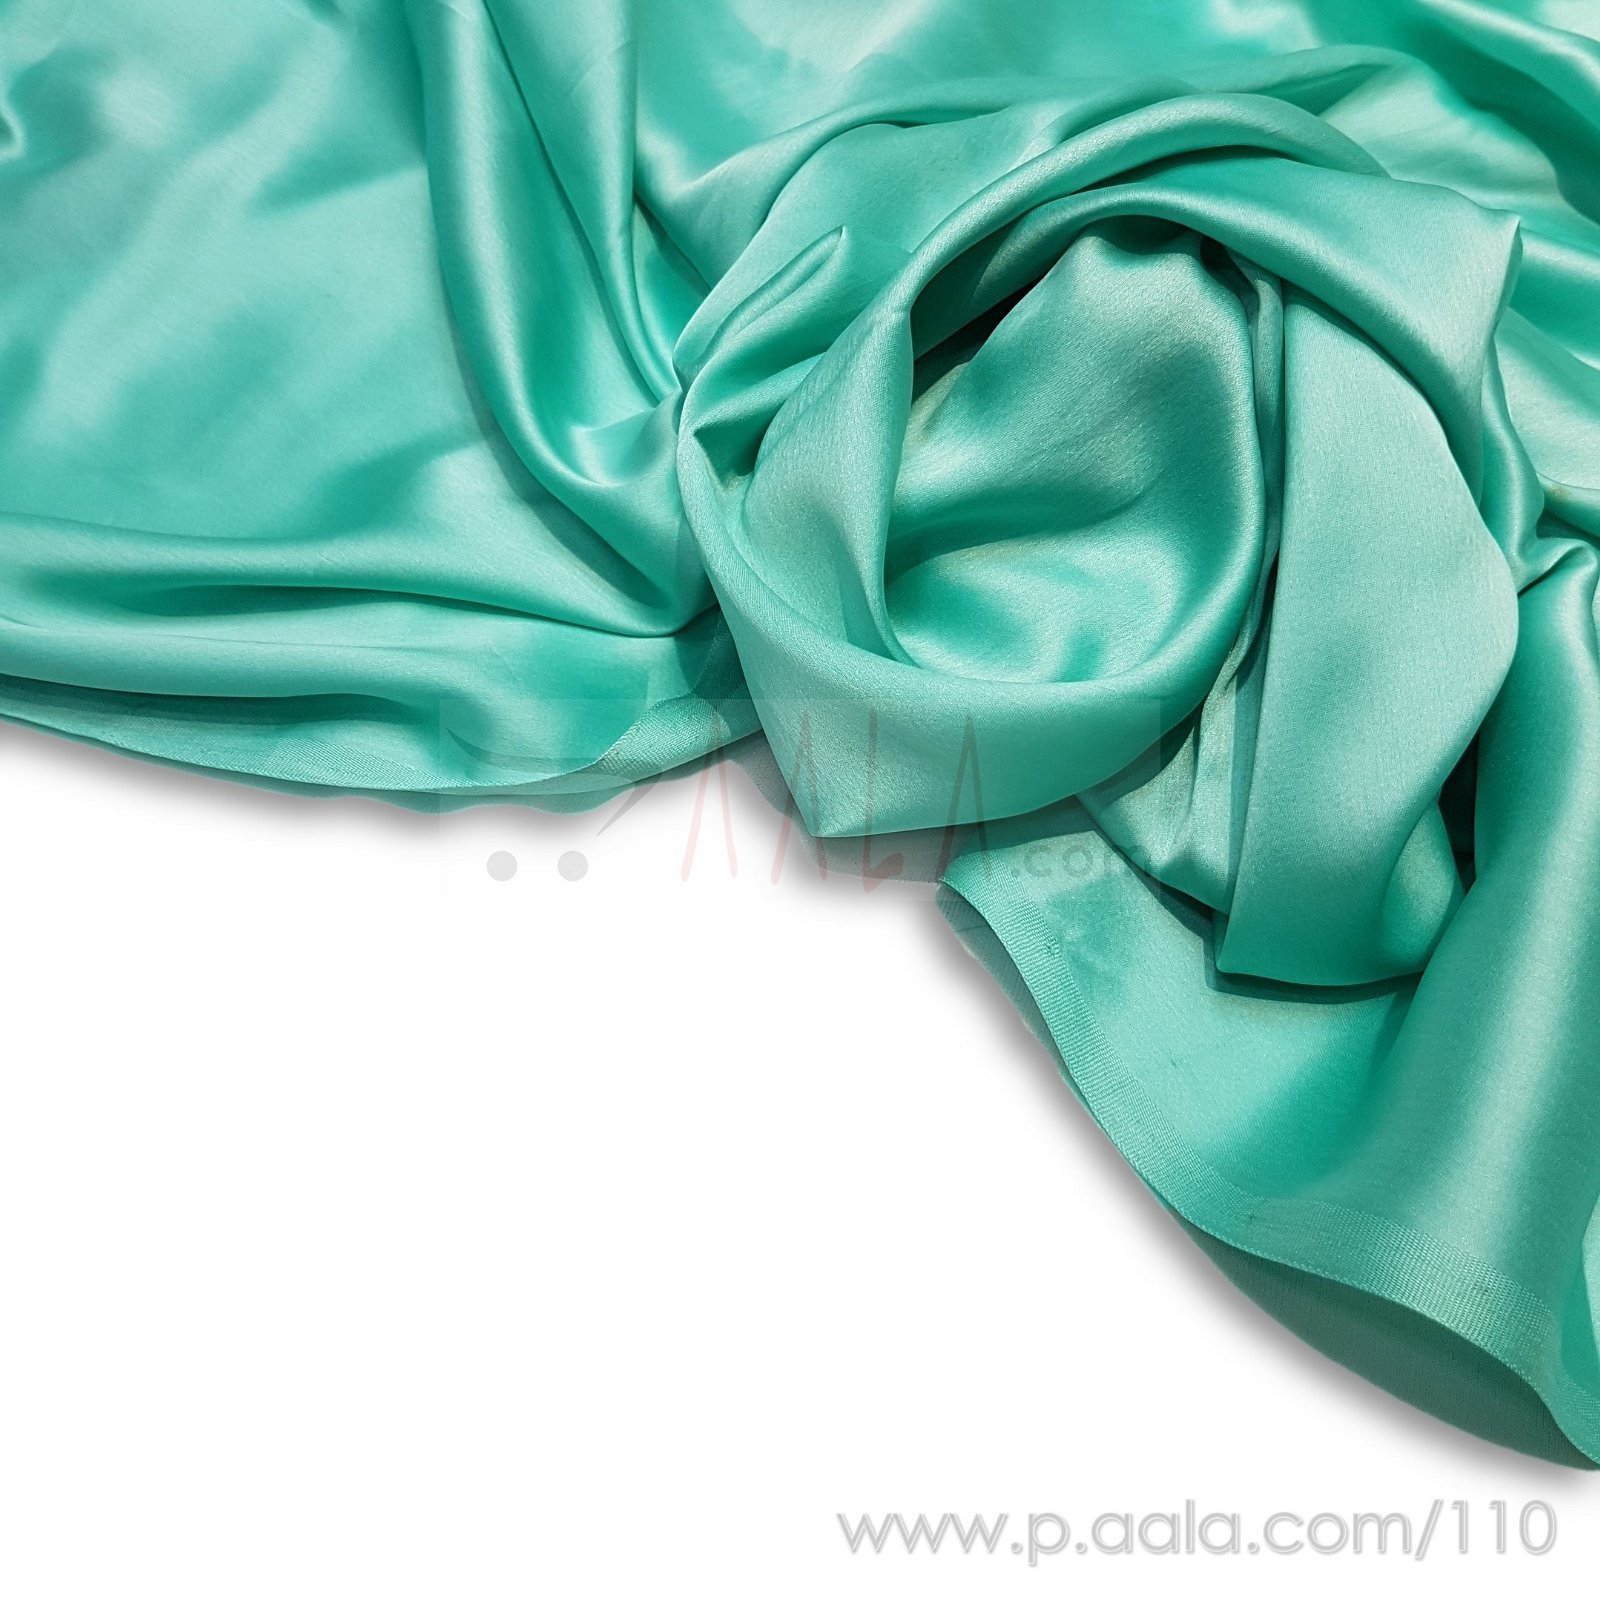 Japan Satin Poly-ester Z1 44 Inches Dyed Per Metre #110